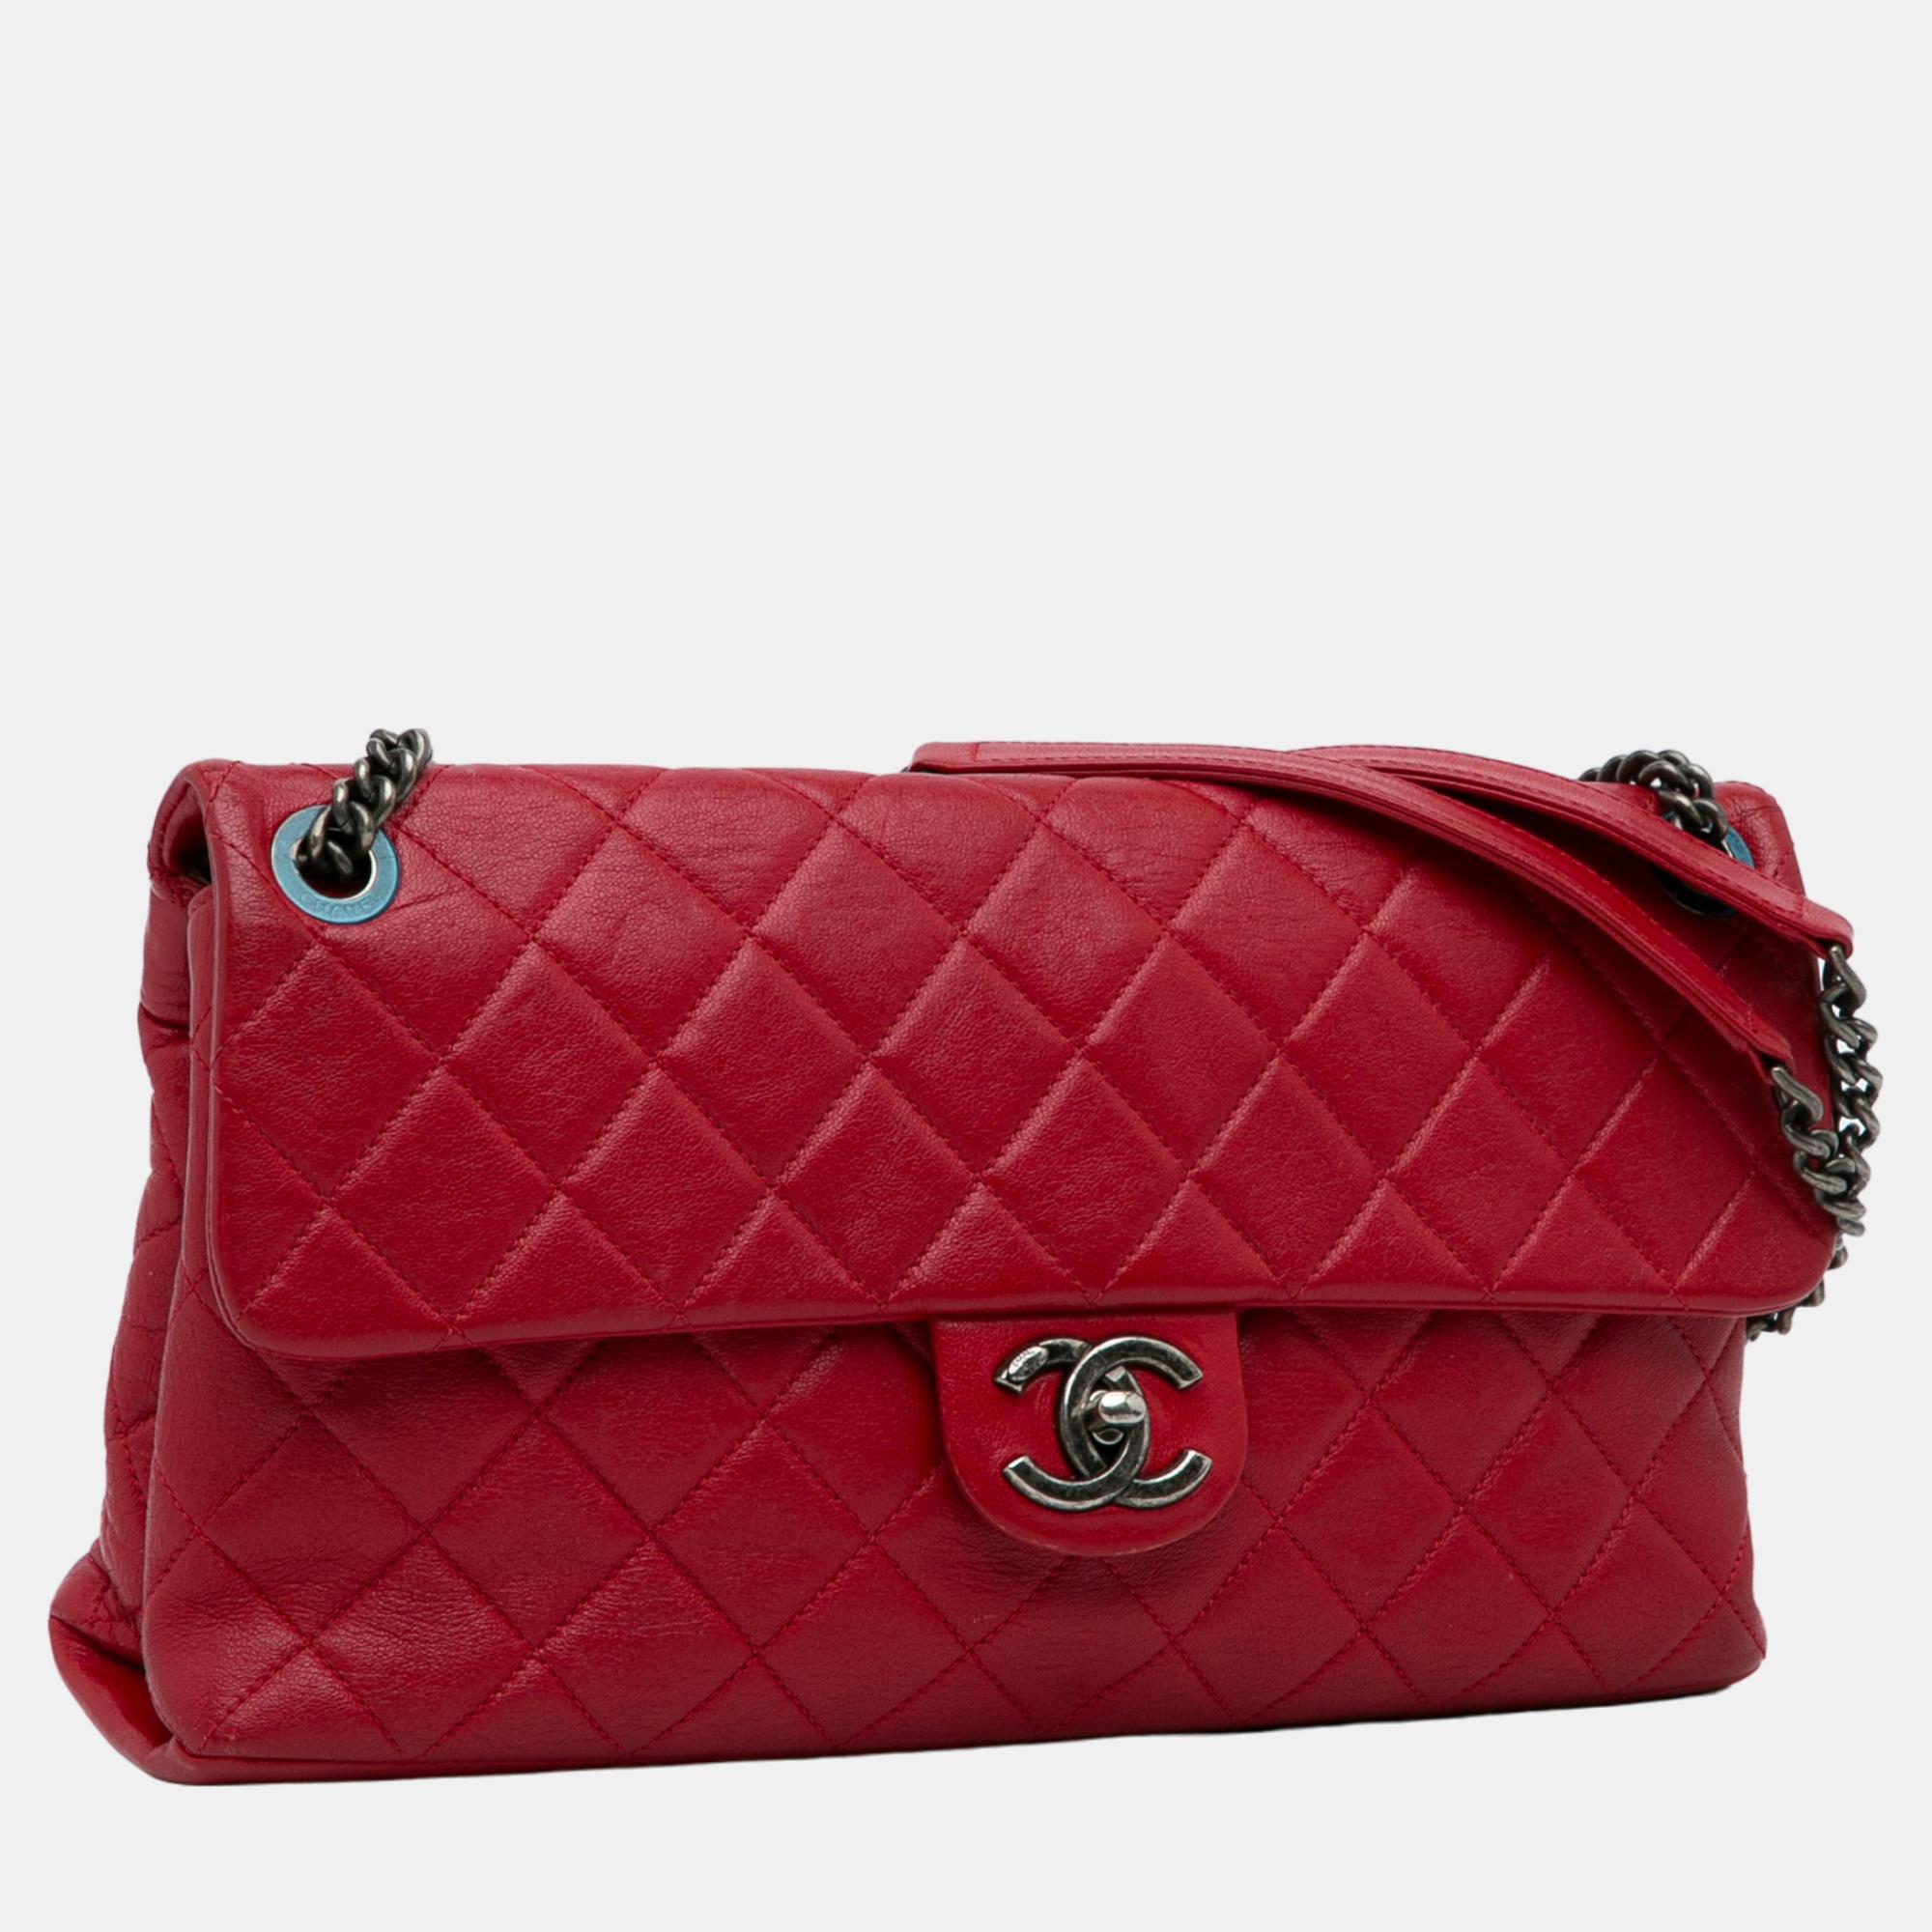 

Chanel Red 31 Rue Cambon Flap Bag